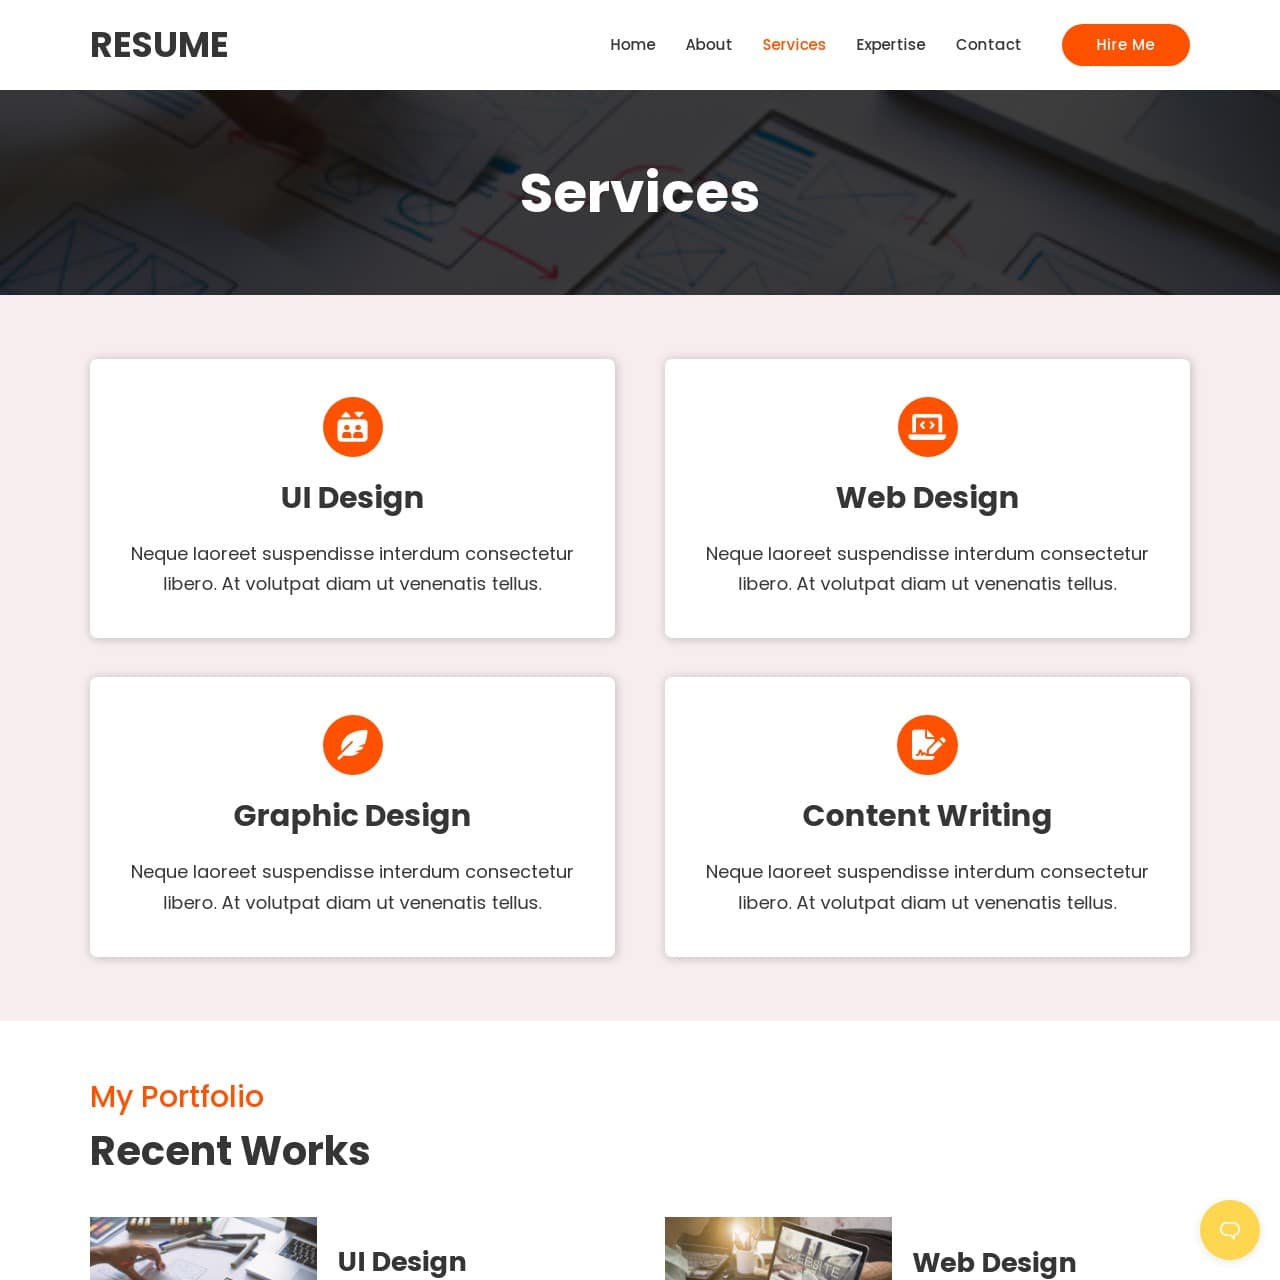 Resume Template - Services Page